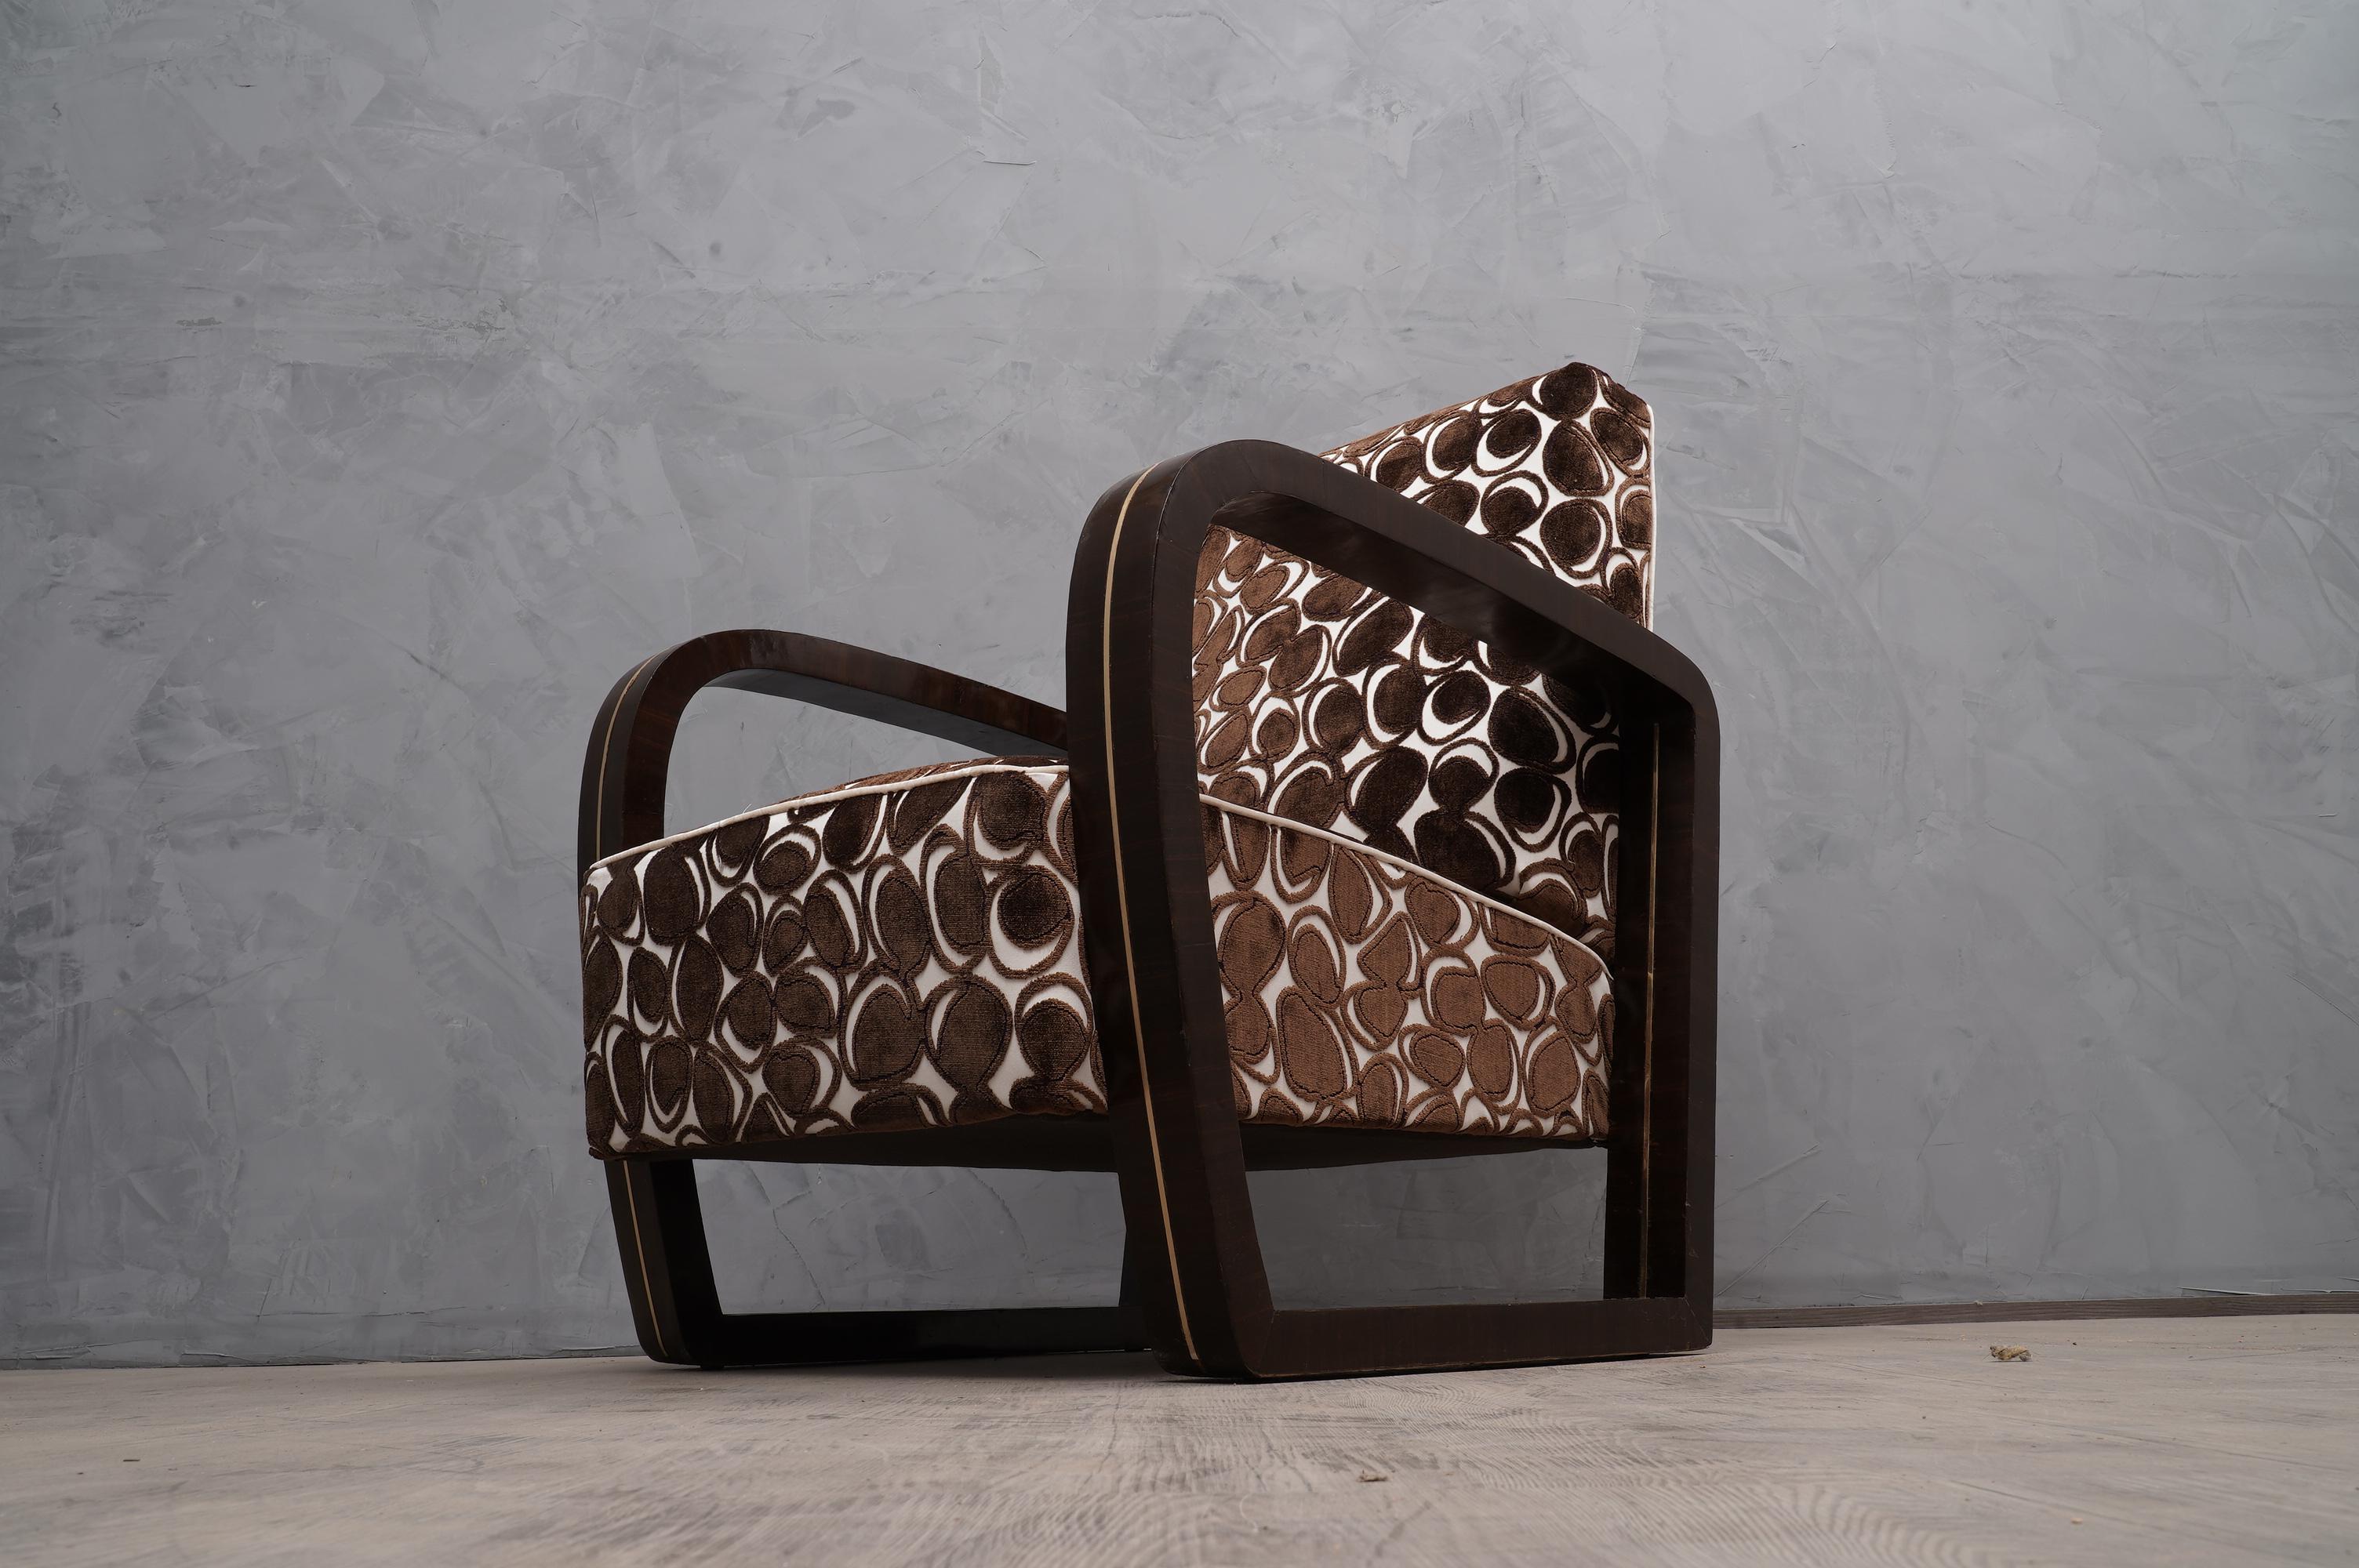 This pair of armchairs in addition to having a very original shape has been dressed with a very high quality velvet fabric. The combination of materials seems perfect, due to the use of materials such as Macassar wood and brass.

The armchairs are